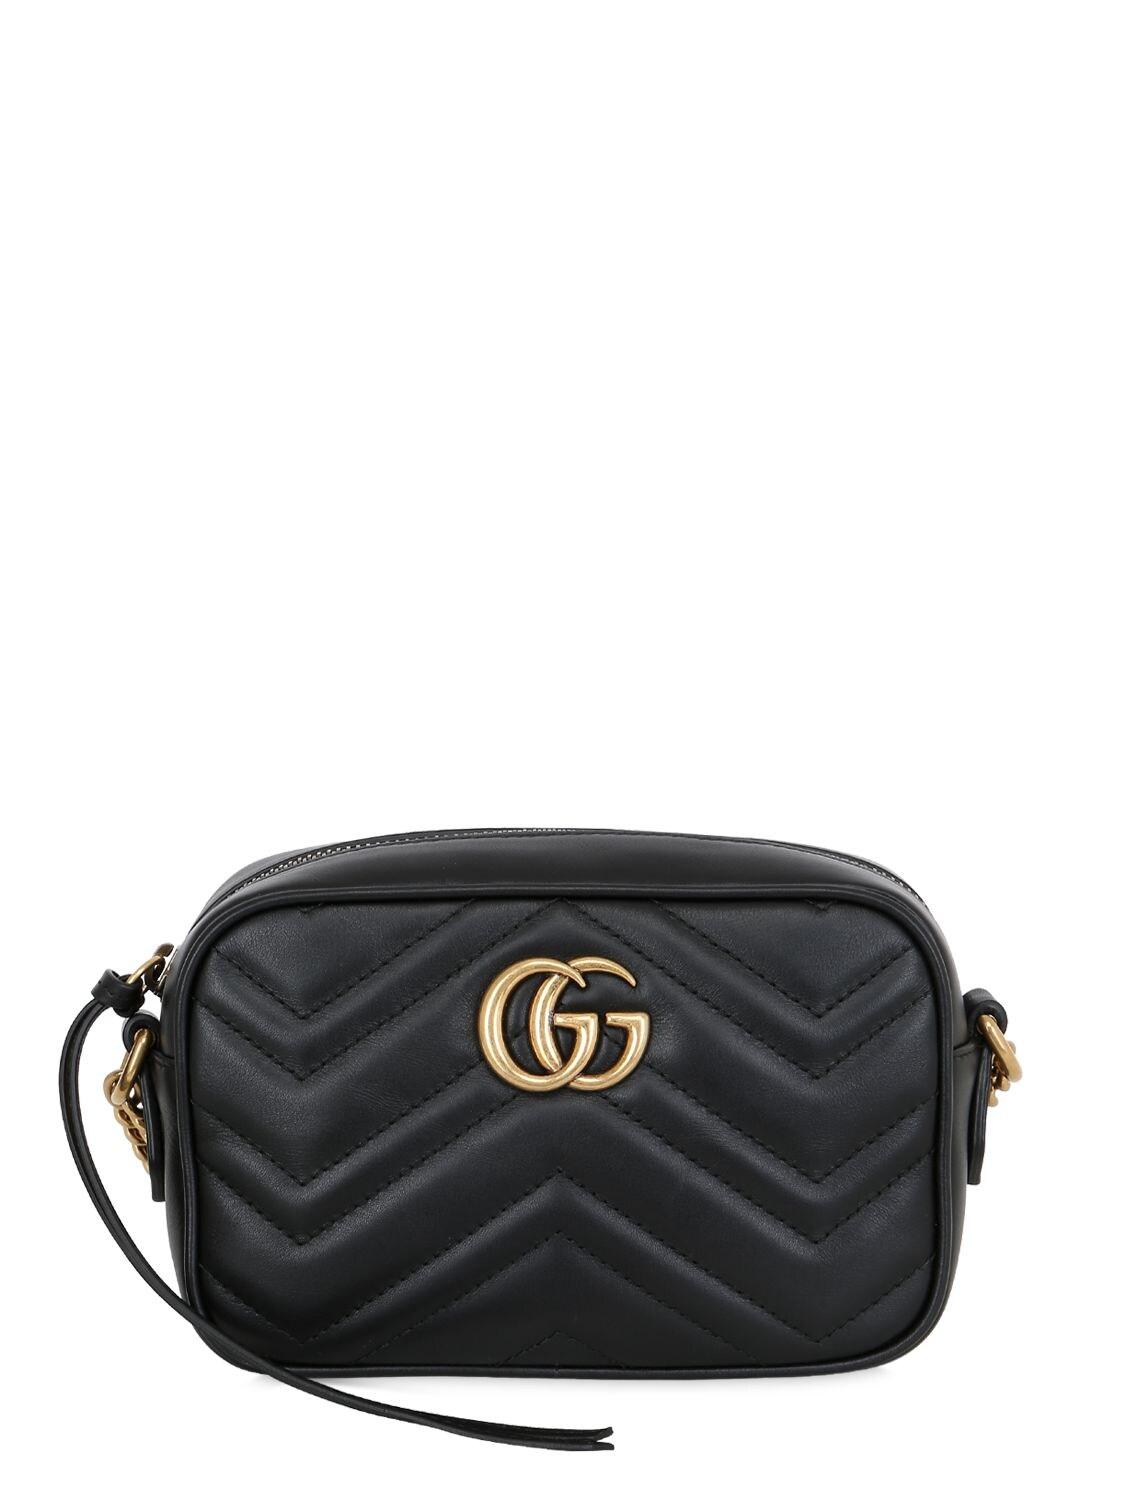 Gucci Mini Gg Marmont 2.0 Leather Bag in Black - Save 20% - Lyst